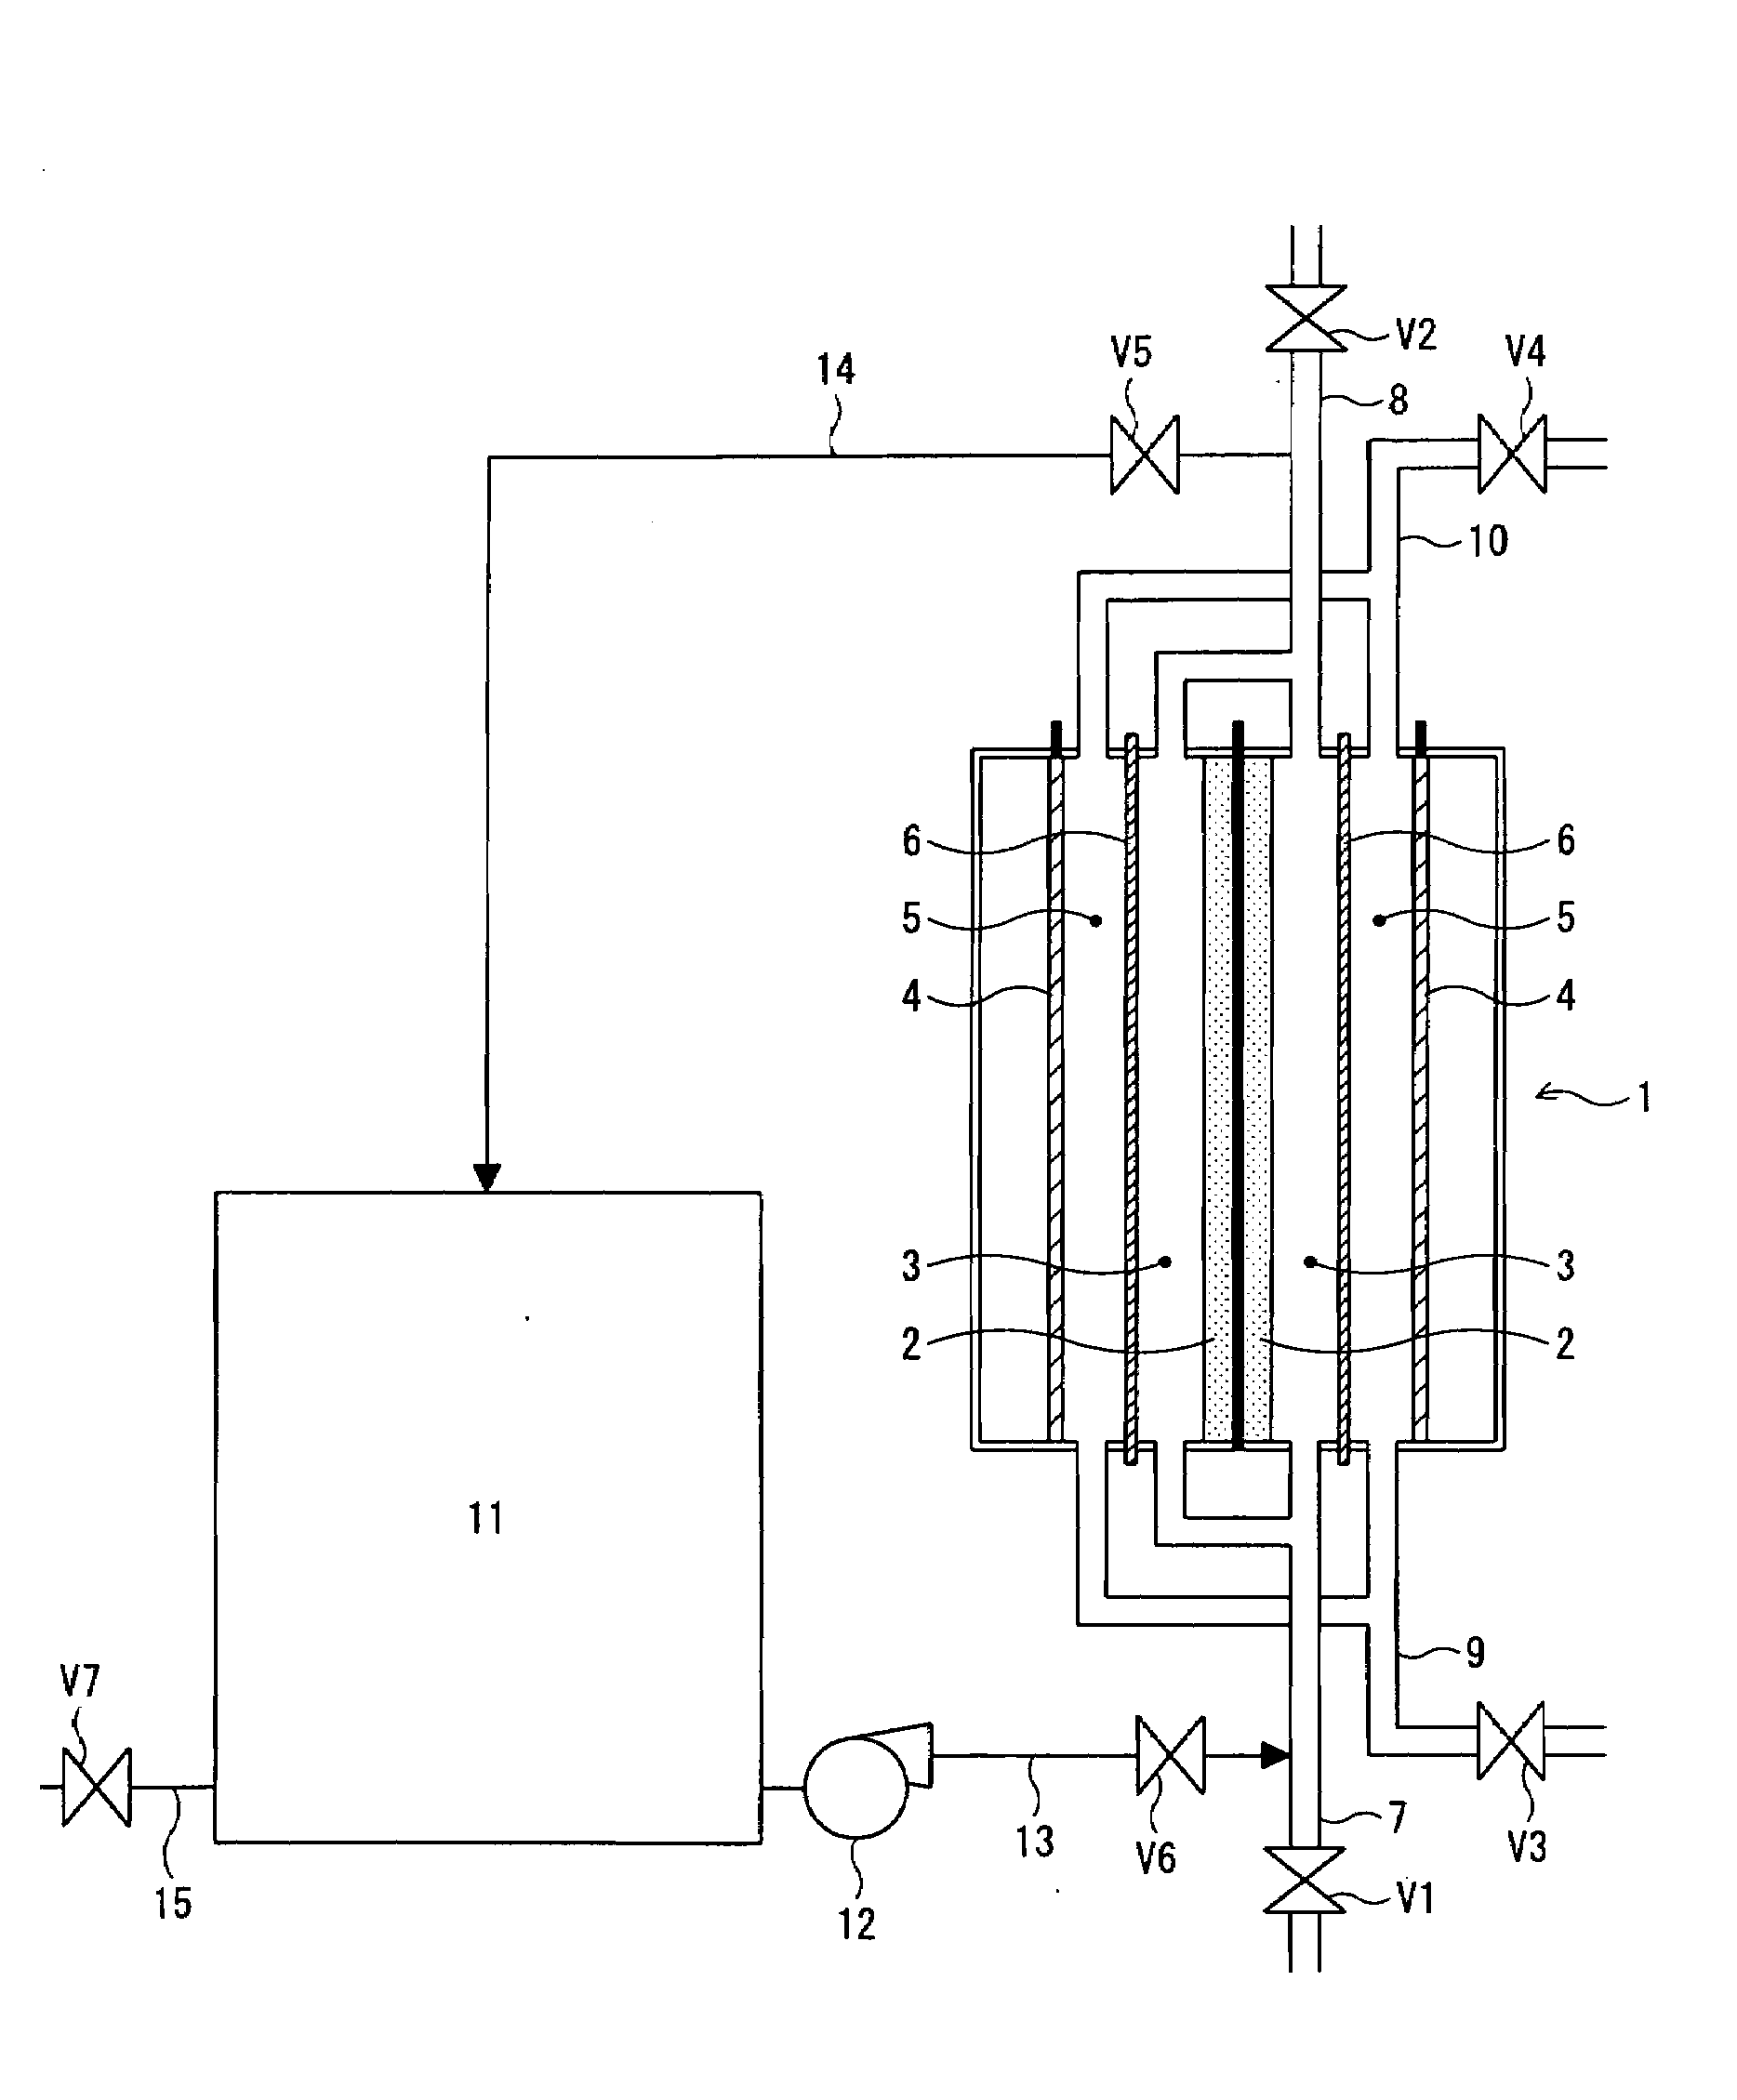 Method for recovering performance of electrolyzer for use in production of polysulfide and method for stopping  holding electrolyzer